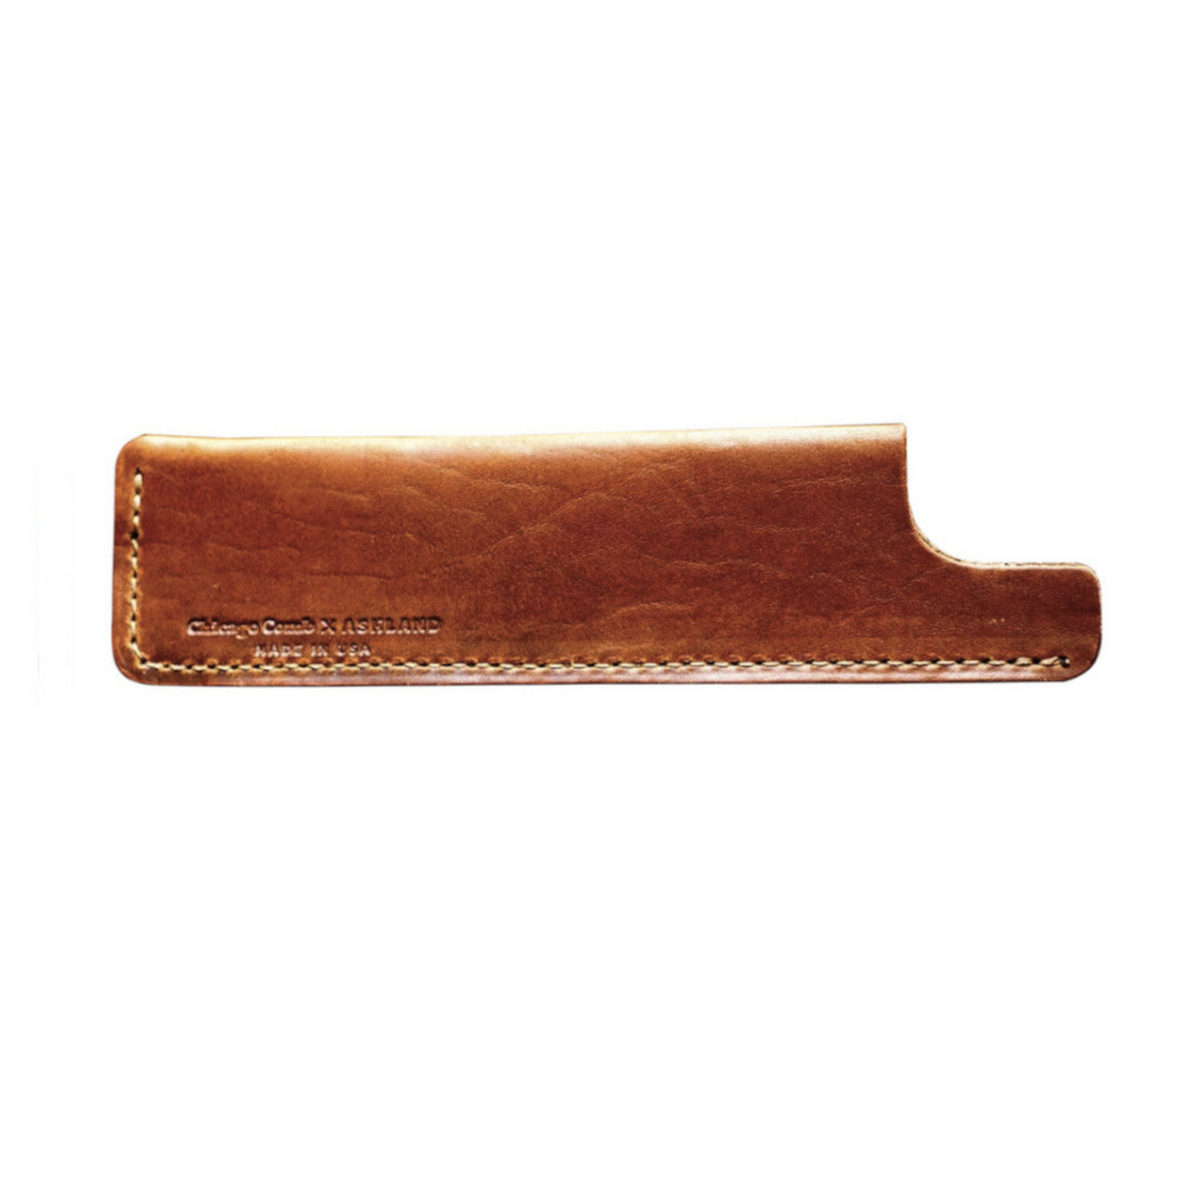 Primary Image of Tan Leather Sheath (Small)